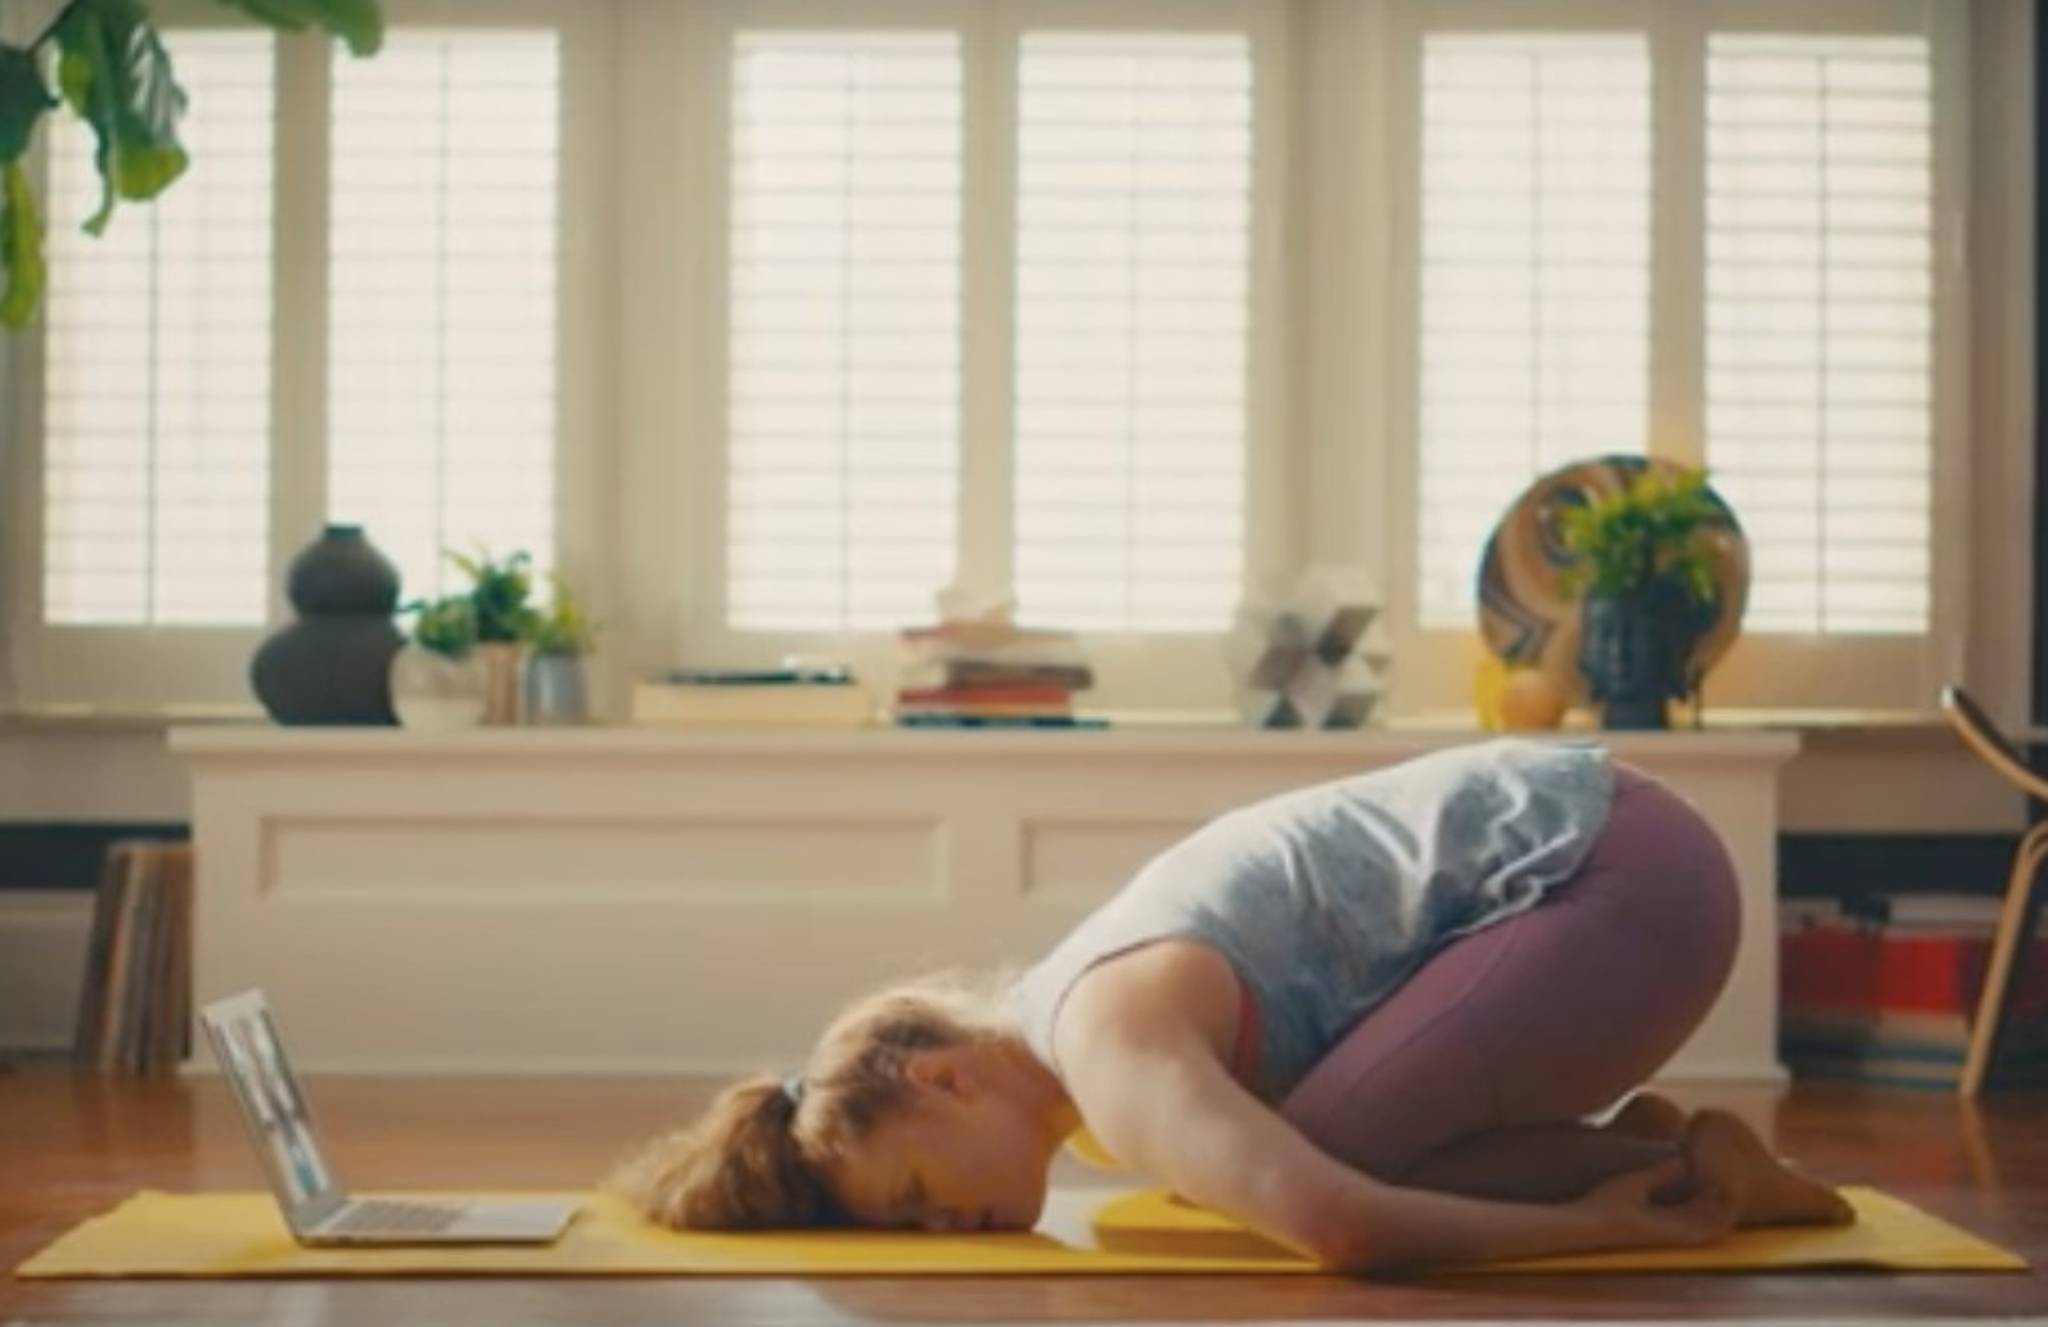 Purely Inspired ad applauds small health victories